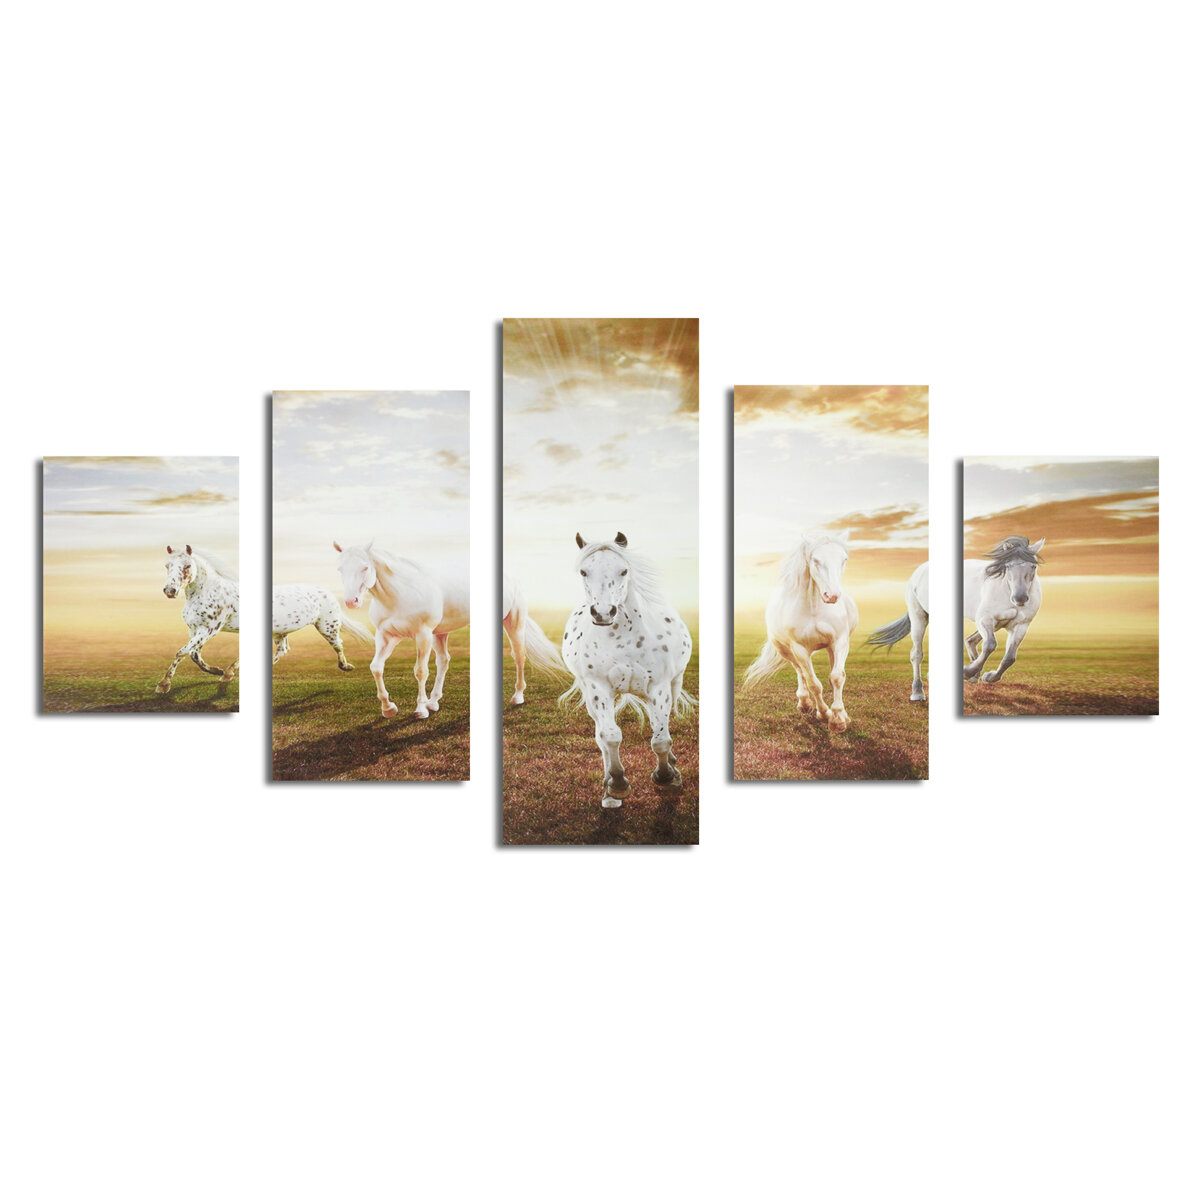 

5Pcs Running Horses Canvas Paintings Wall Decorative Print Art Pictures Frameless Wall Hanging Decorations for Home Offi